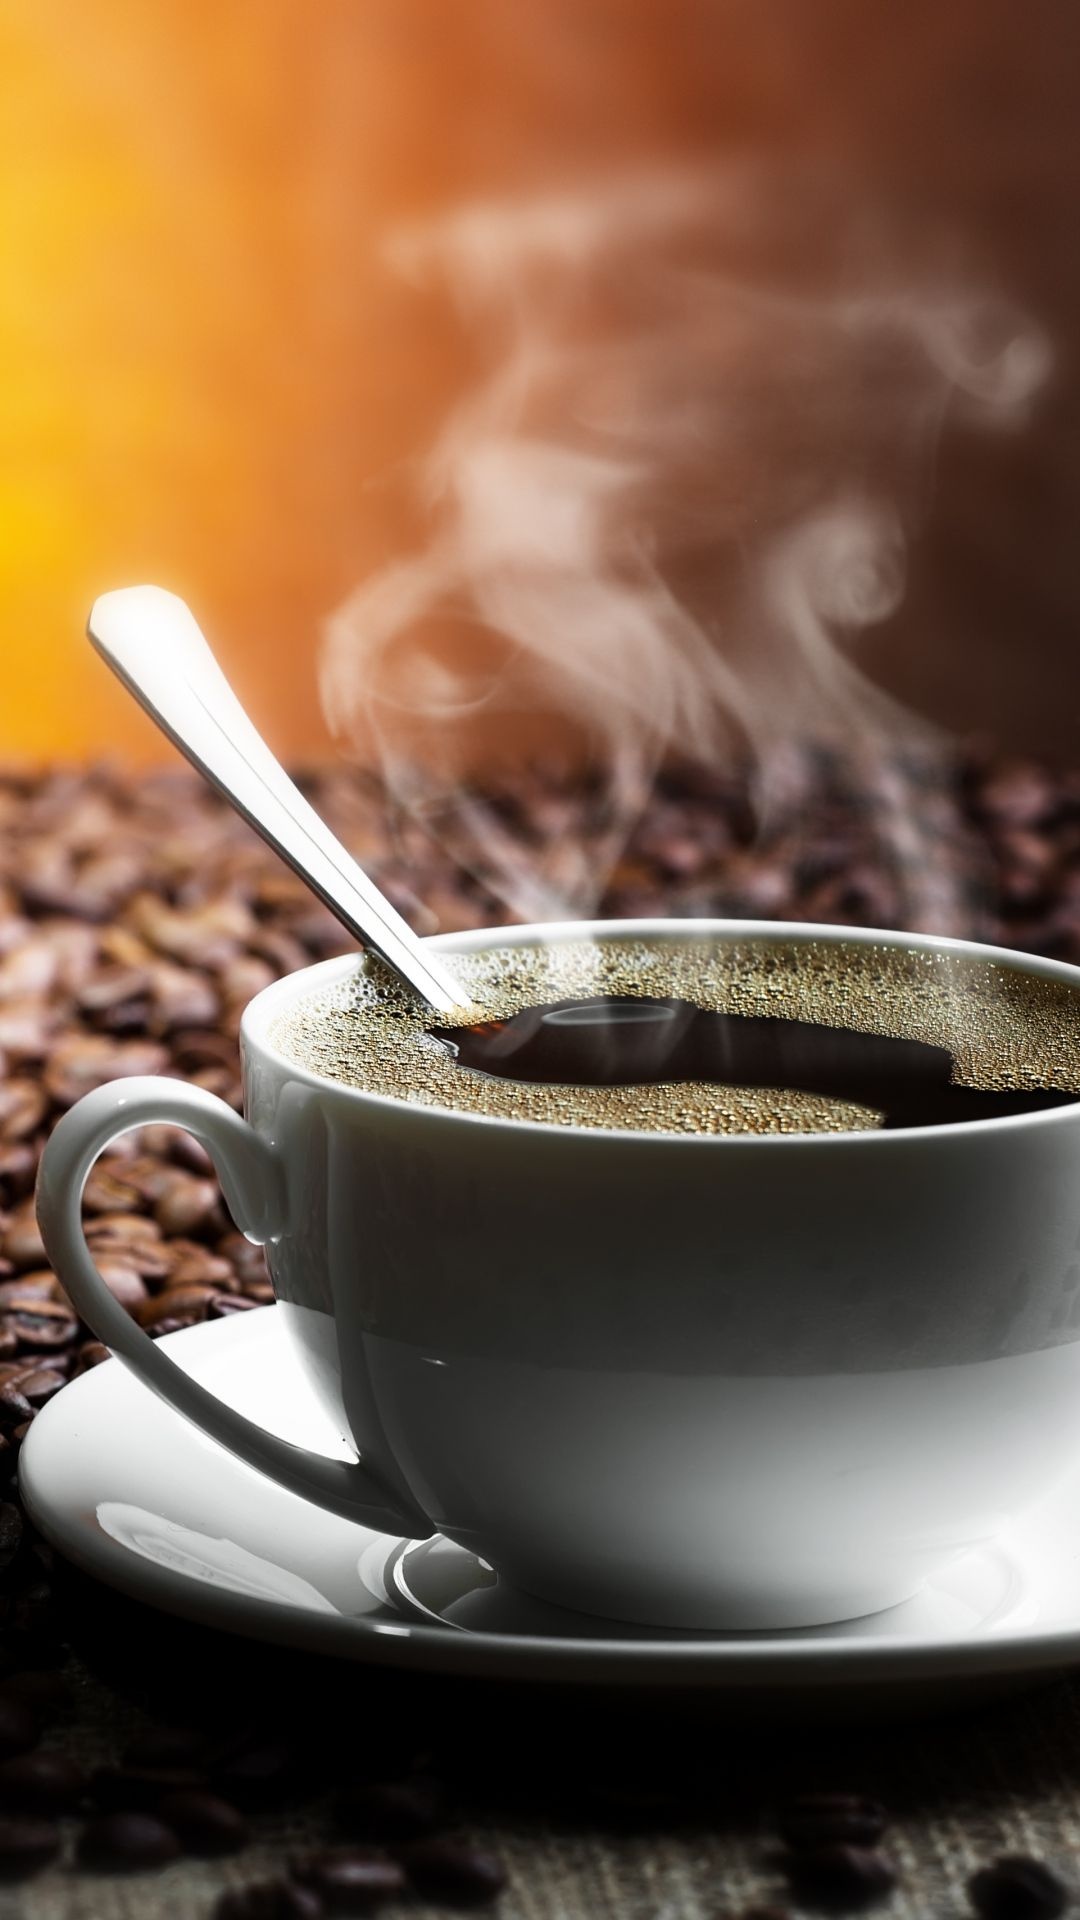 Coffee: Aromatic drink, Stimulating effect on humans, Caffeine content. 1080x1920 Full HD Background.